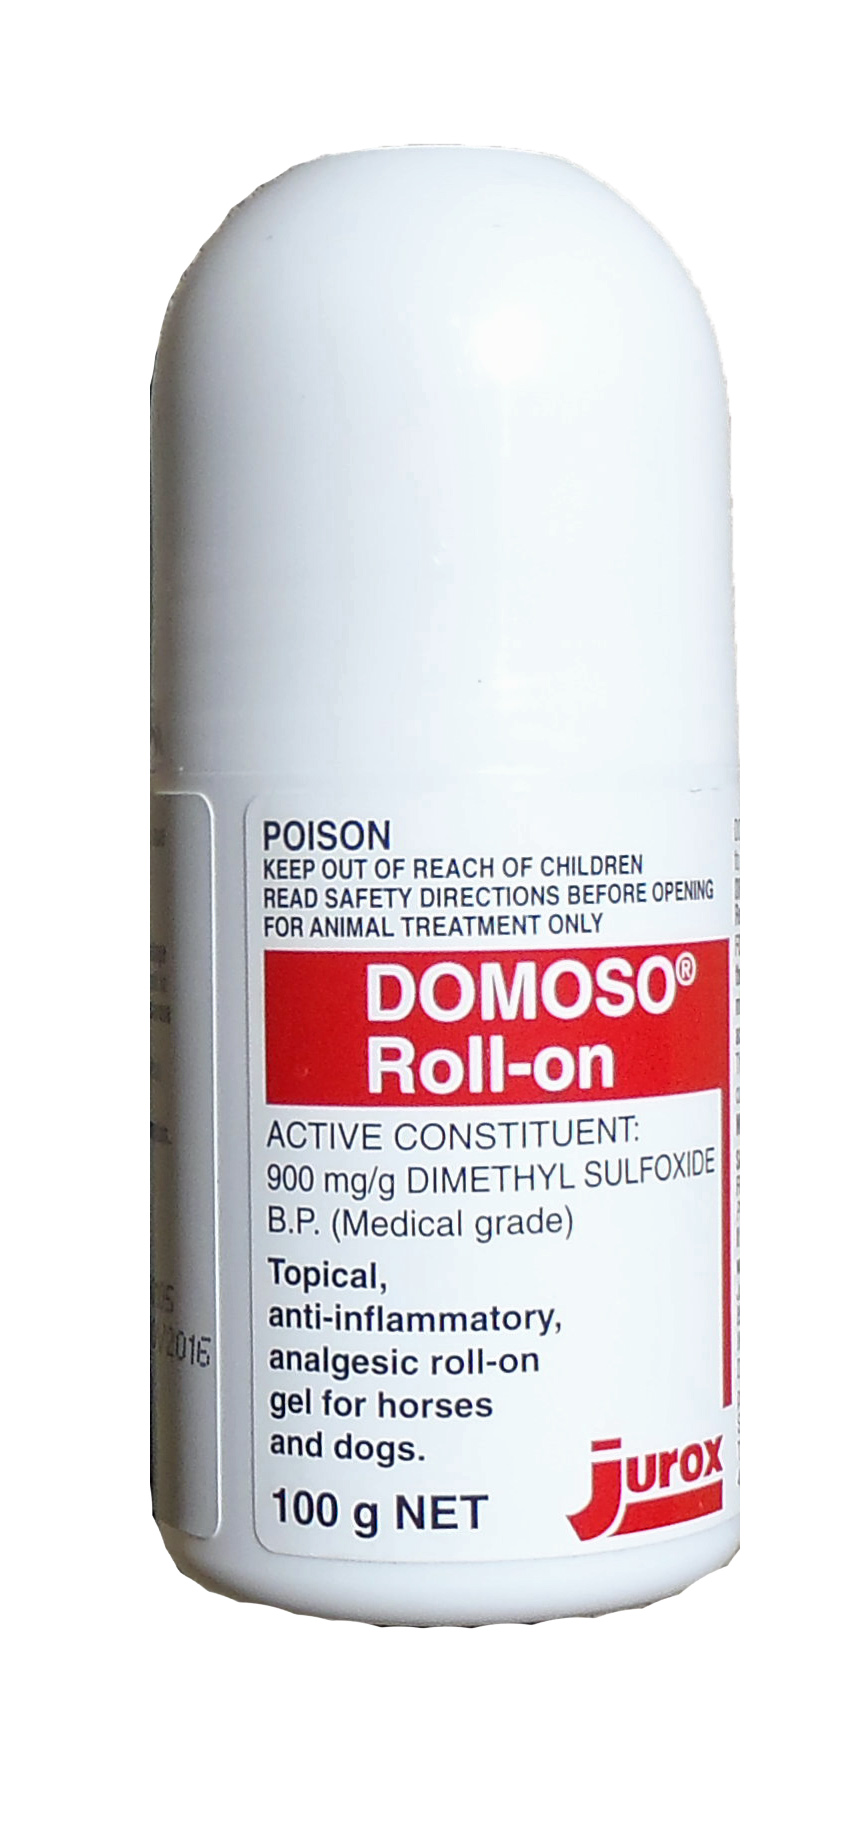 DOMOSO Roll-on 100g